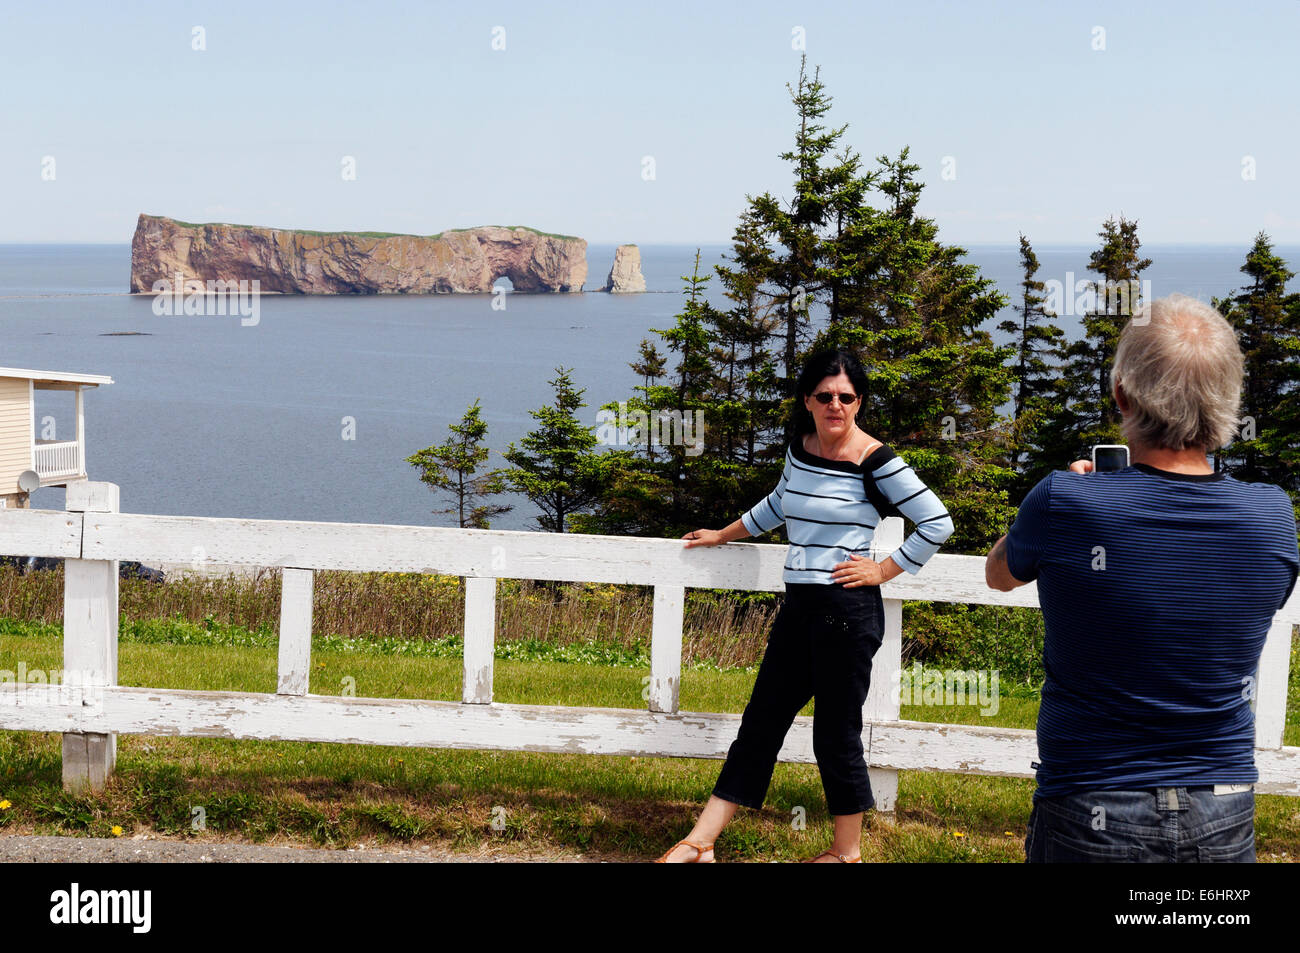 A man taking pictures of his wife and the Rocher Percé in Gaspesie, Quebec Stock Photo